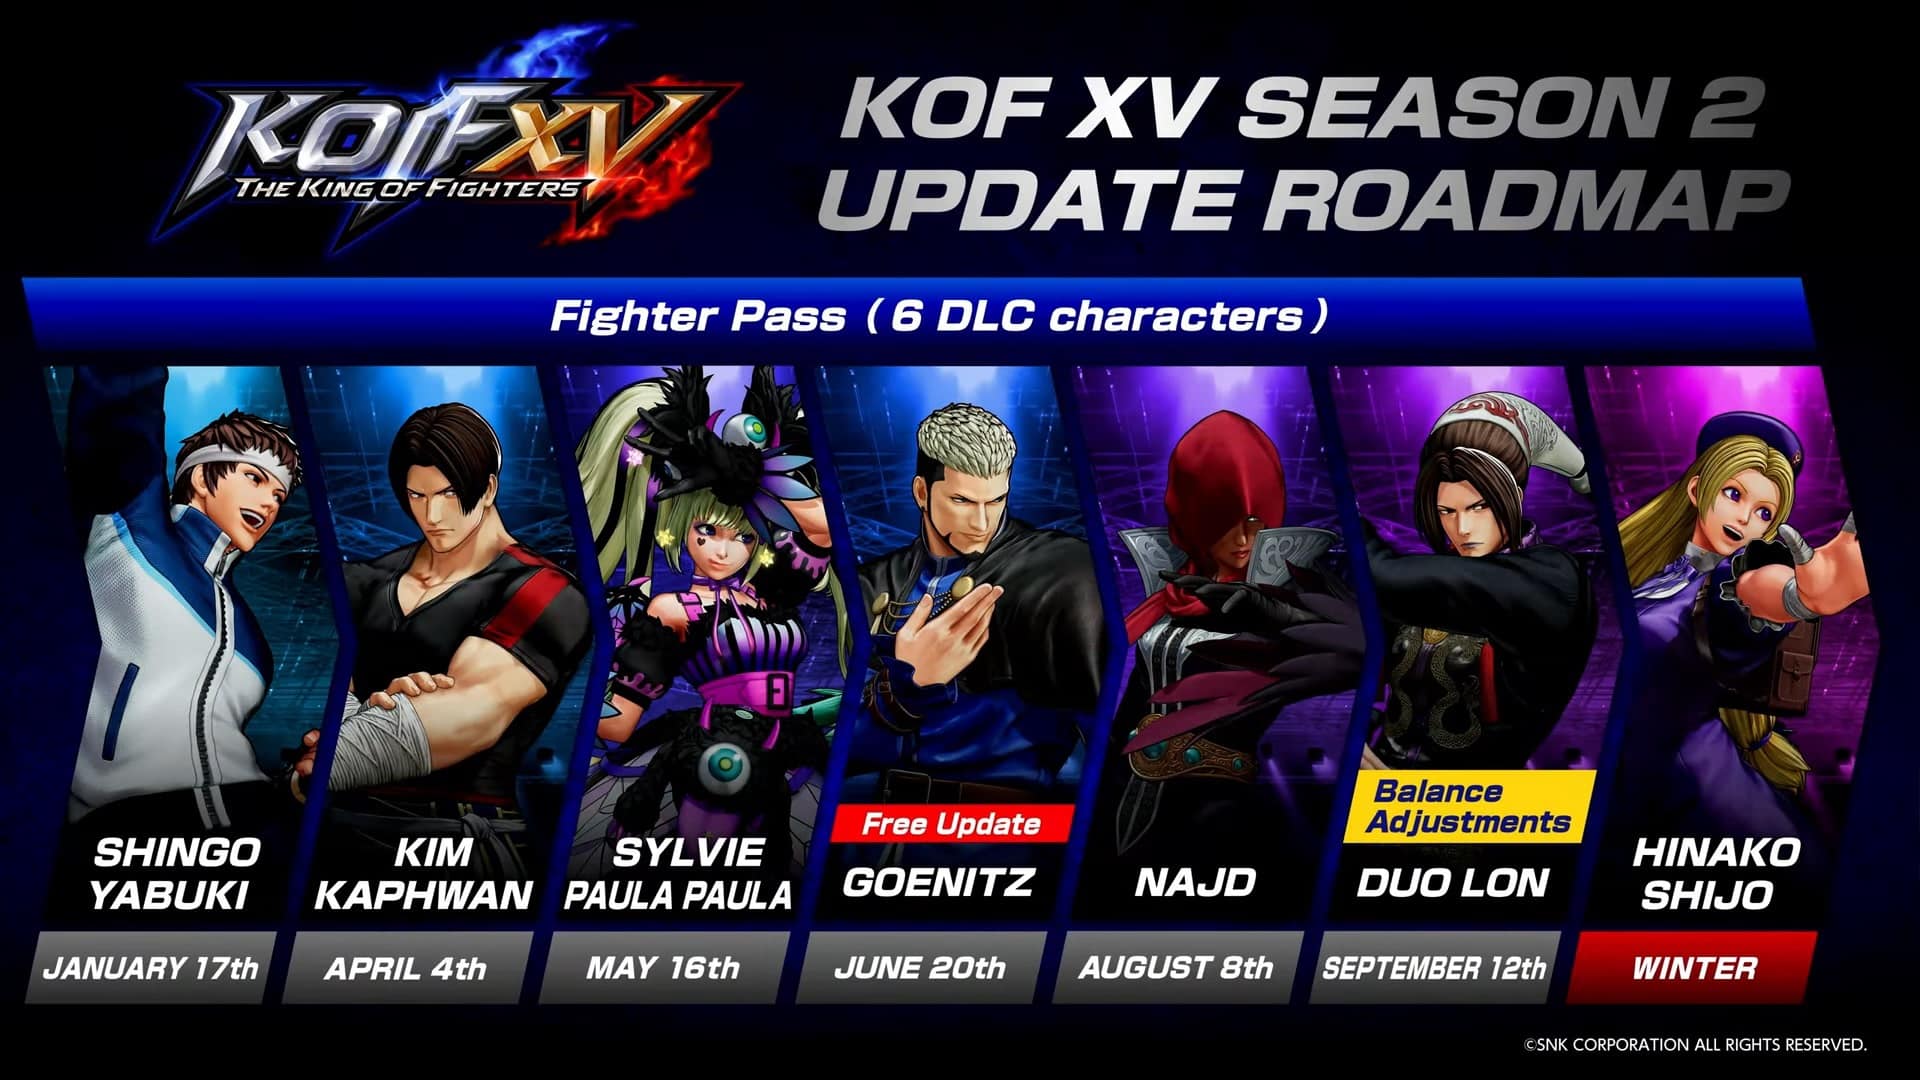 The King of Fighters XV Free DLC Character Goenitz Gets Release